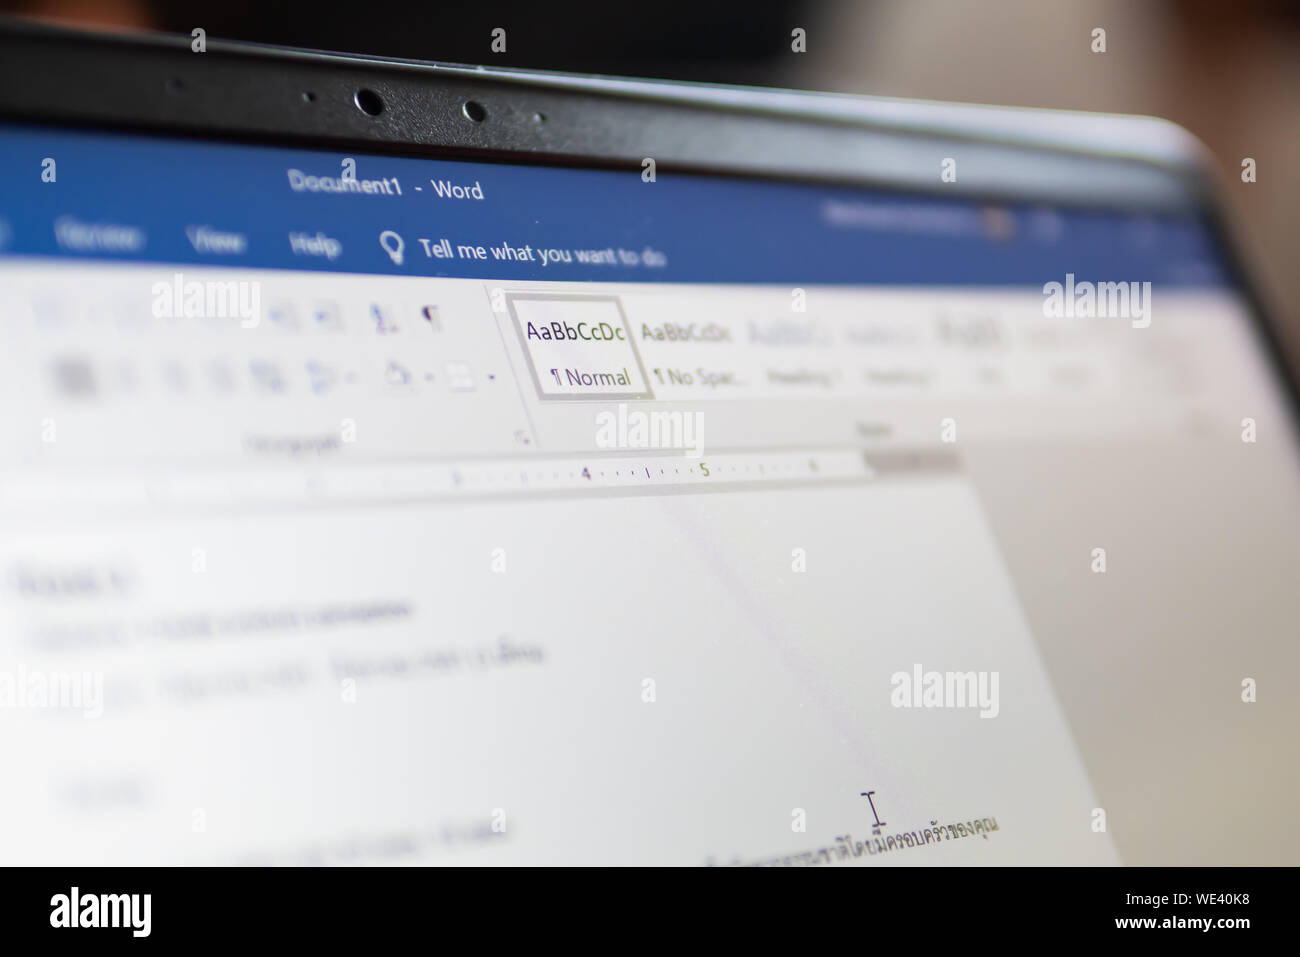 Bangkok, Thailand - August 22, 2019 : Microsoft Word, a word processor developed by Microsoft, on computer screen. Stock Photo